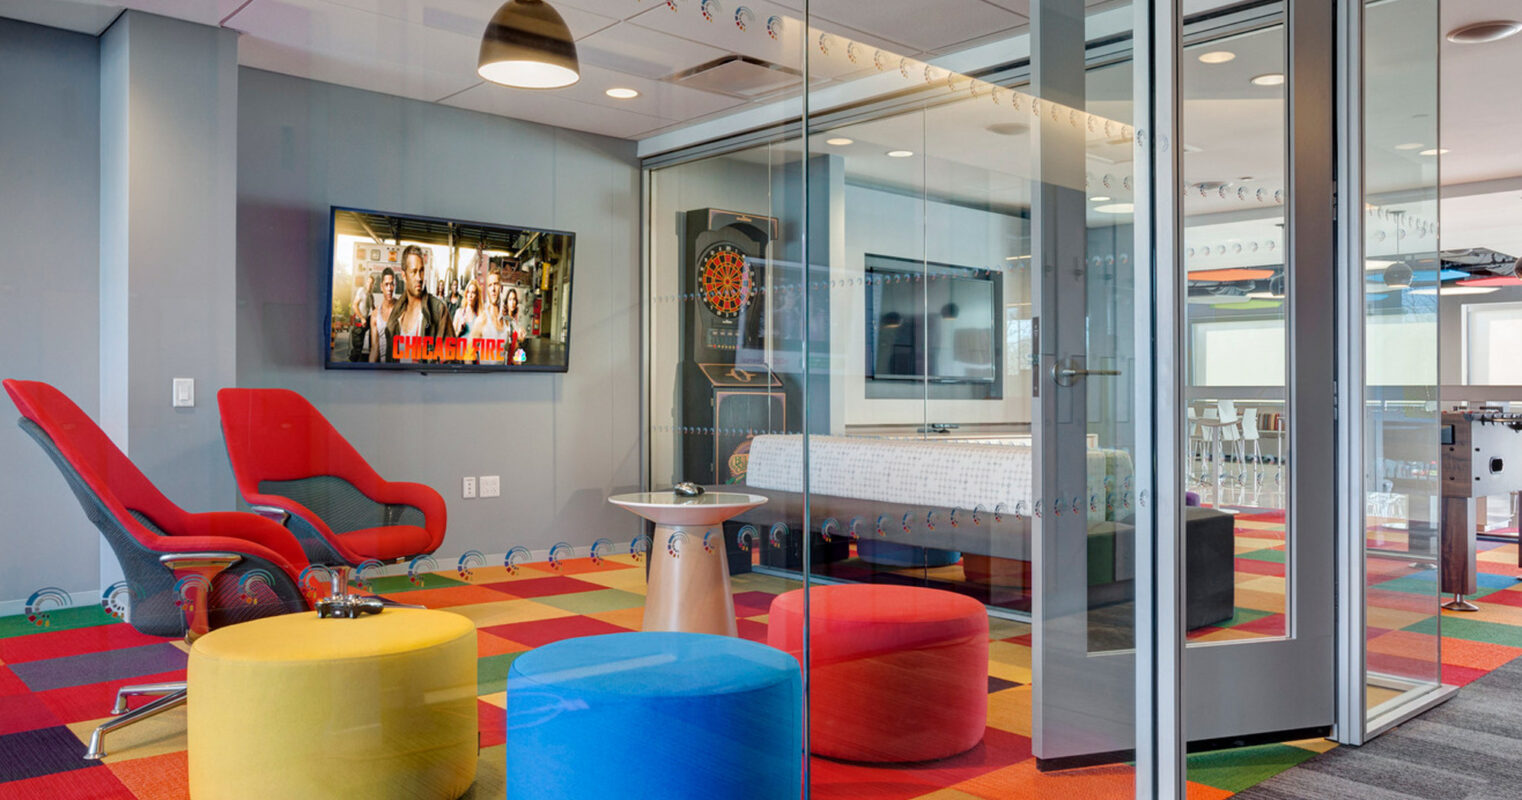 Modern office lounge with vibrant multicolored carpet, red ergonomic chair, and yellow and blue poufs. Glass walls provide transparency, with playful dartboard accentuating the creative atmosphere.